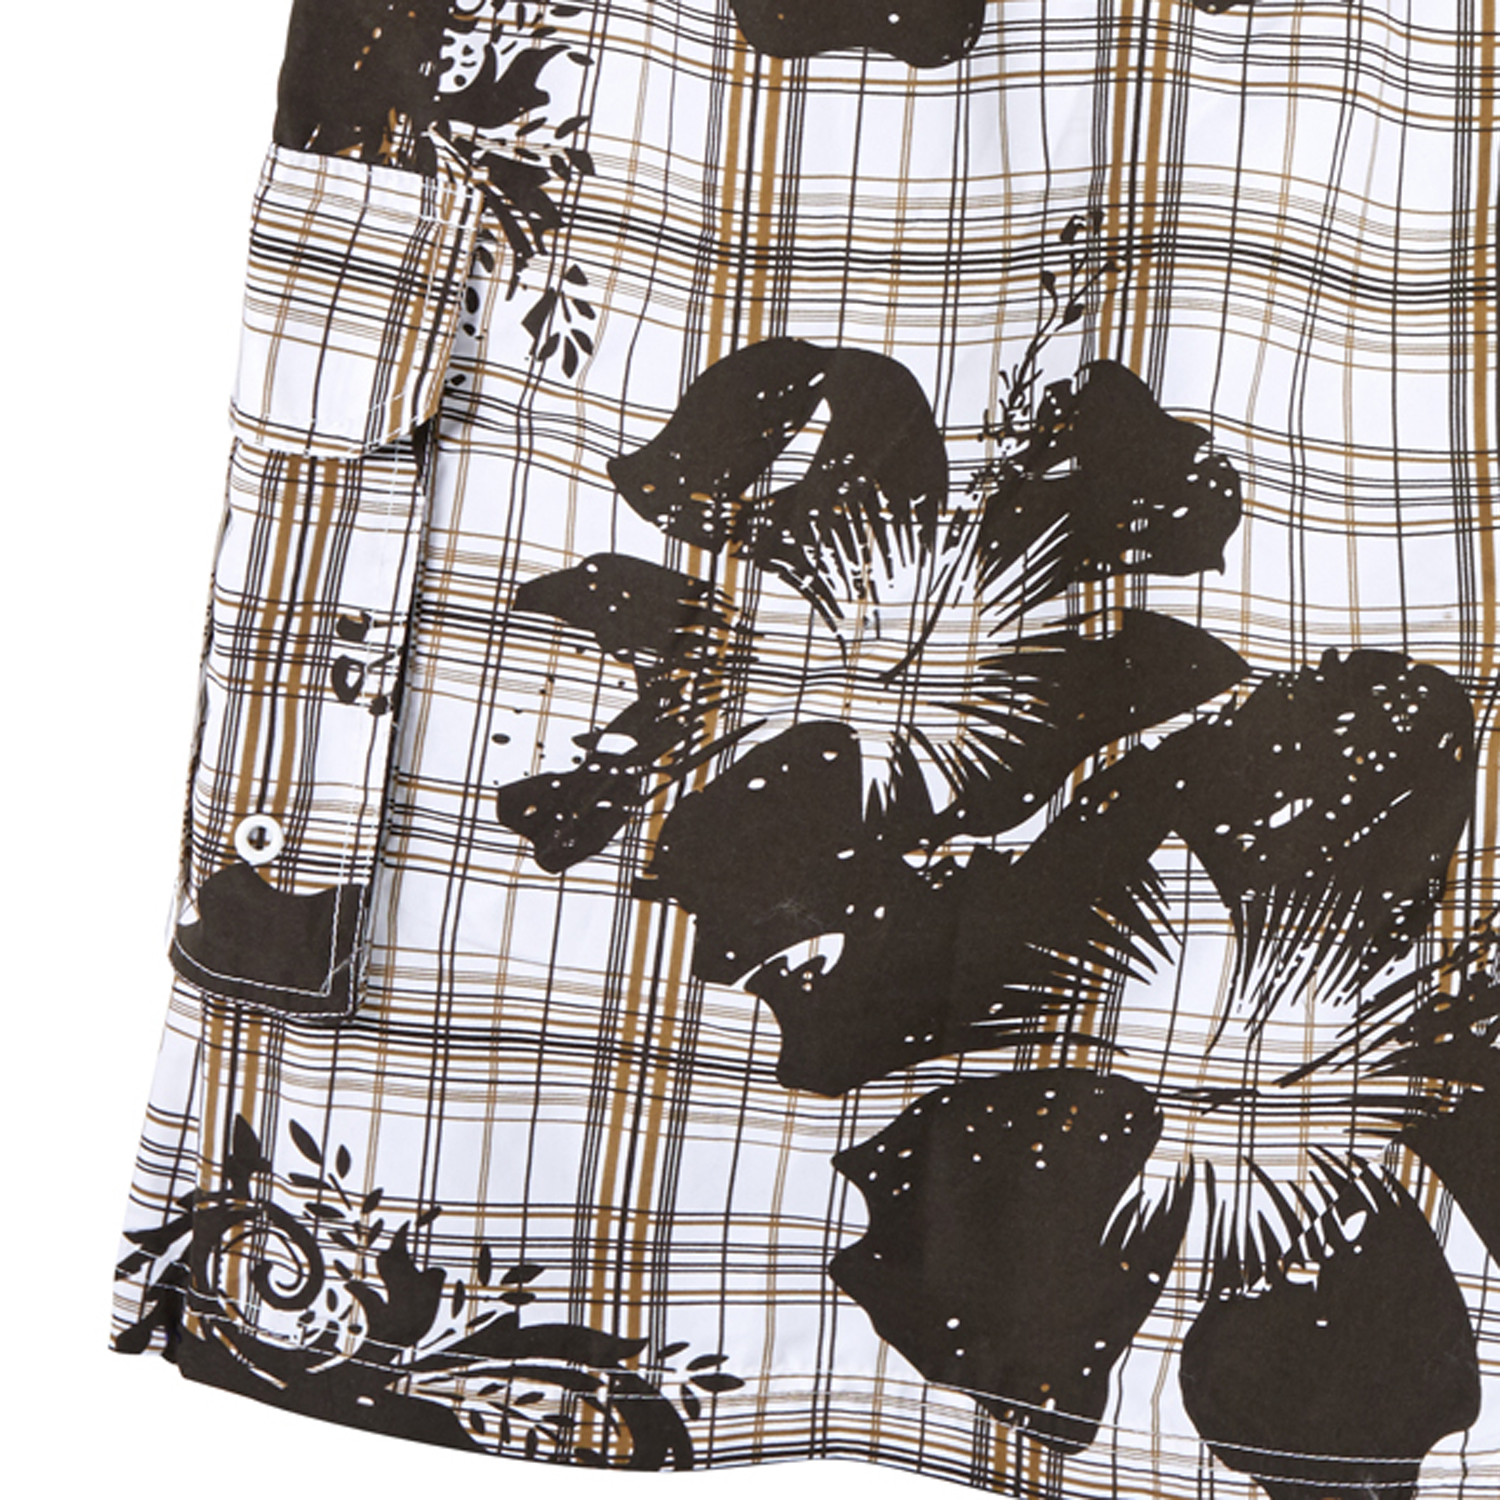 Swim bermudas by eleMar for men white-brown with flower print in oversizes up to 10XL